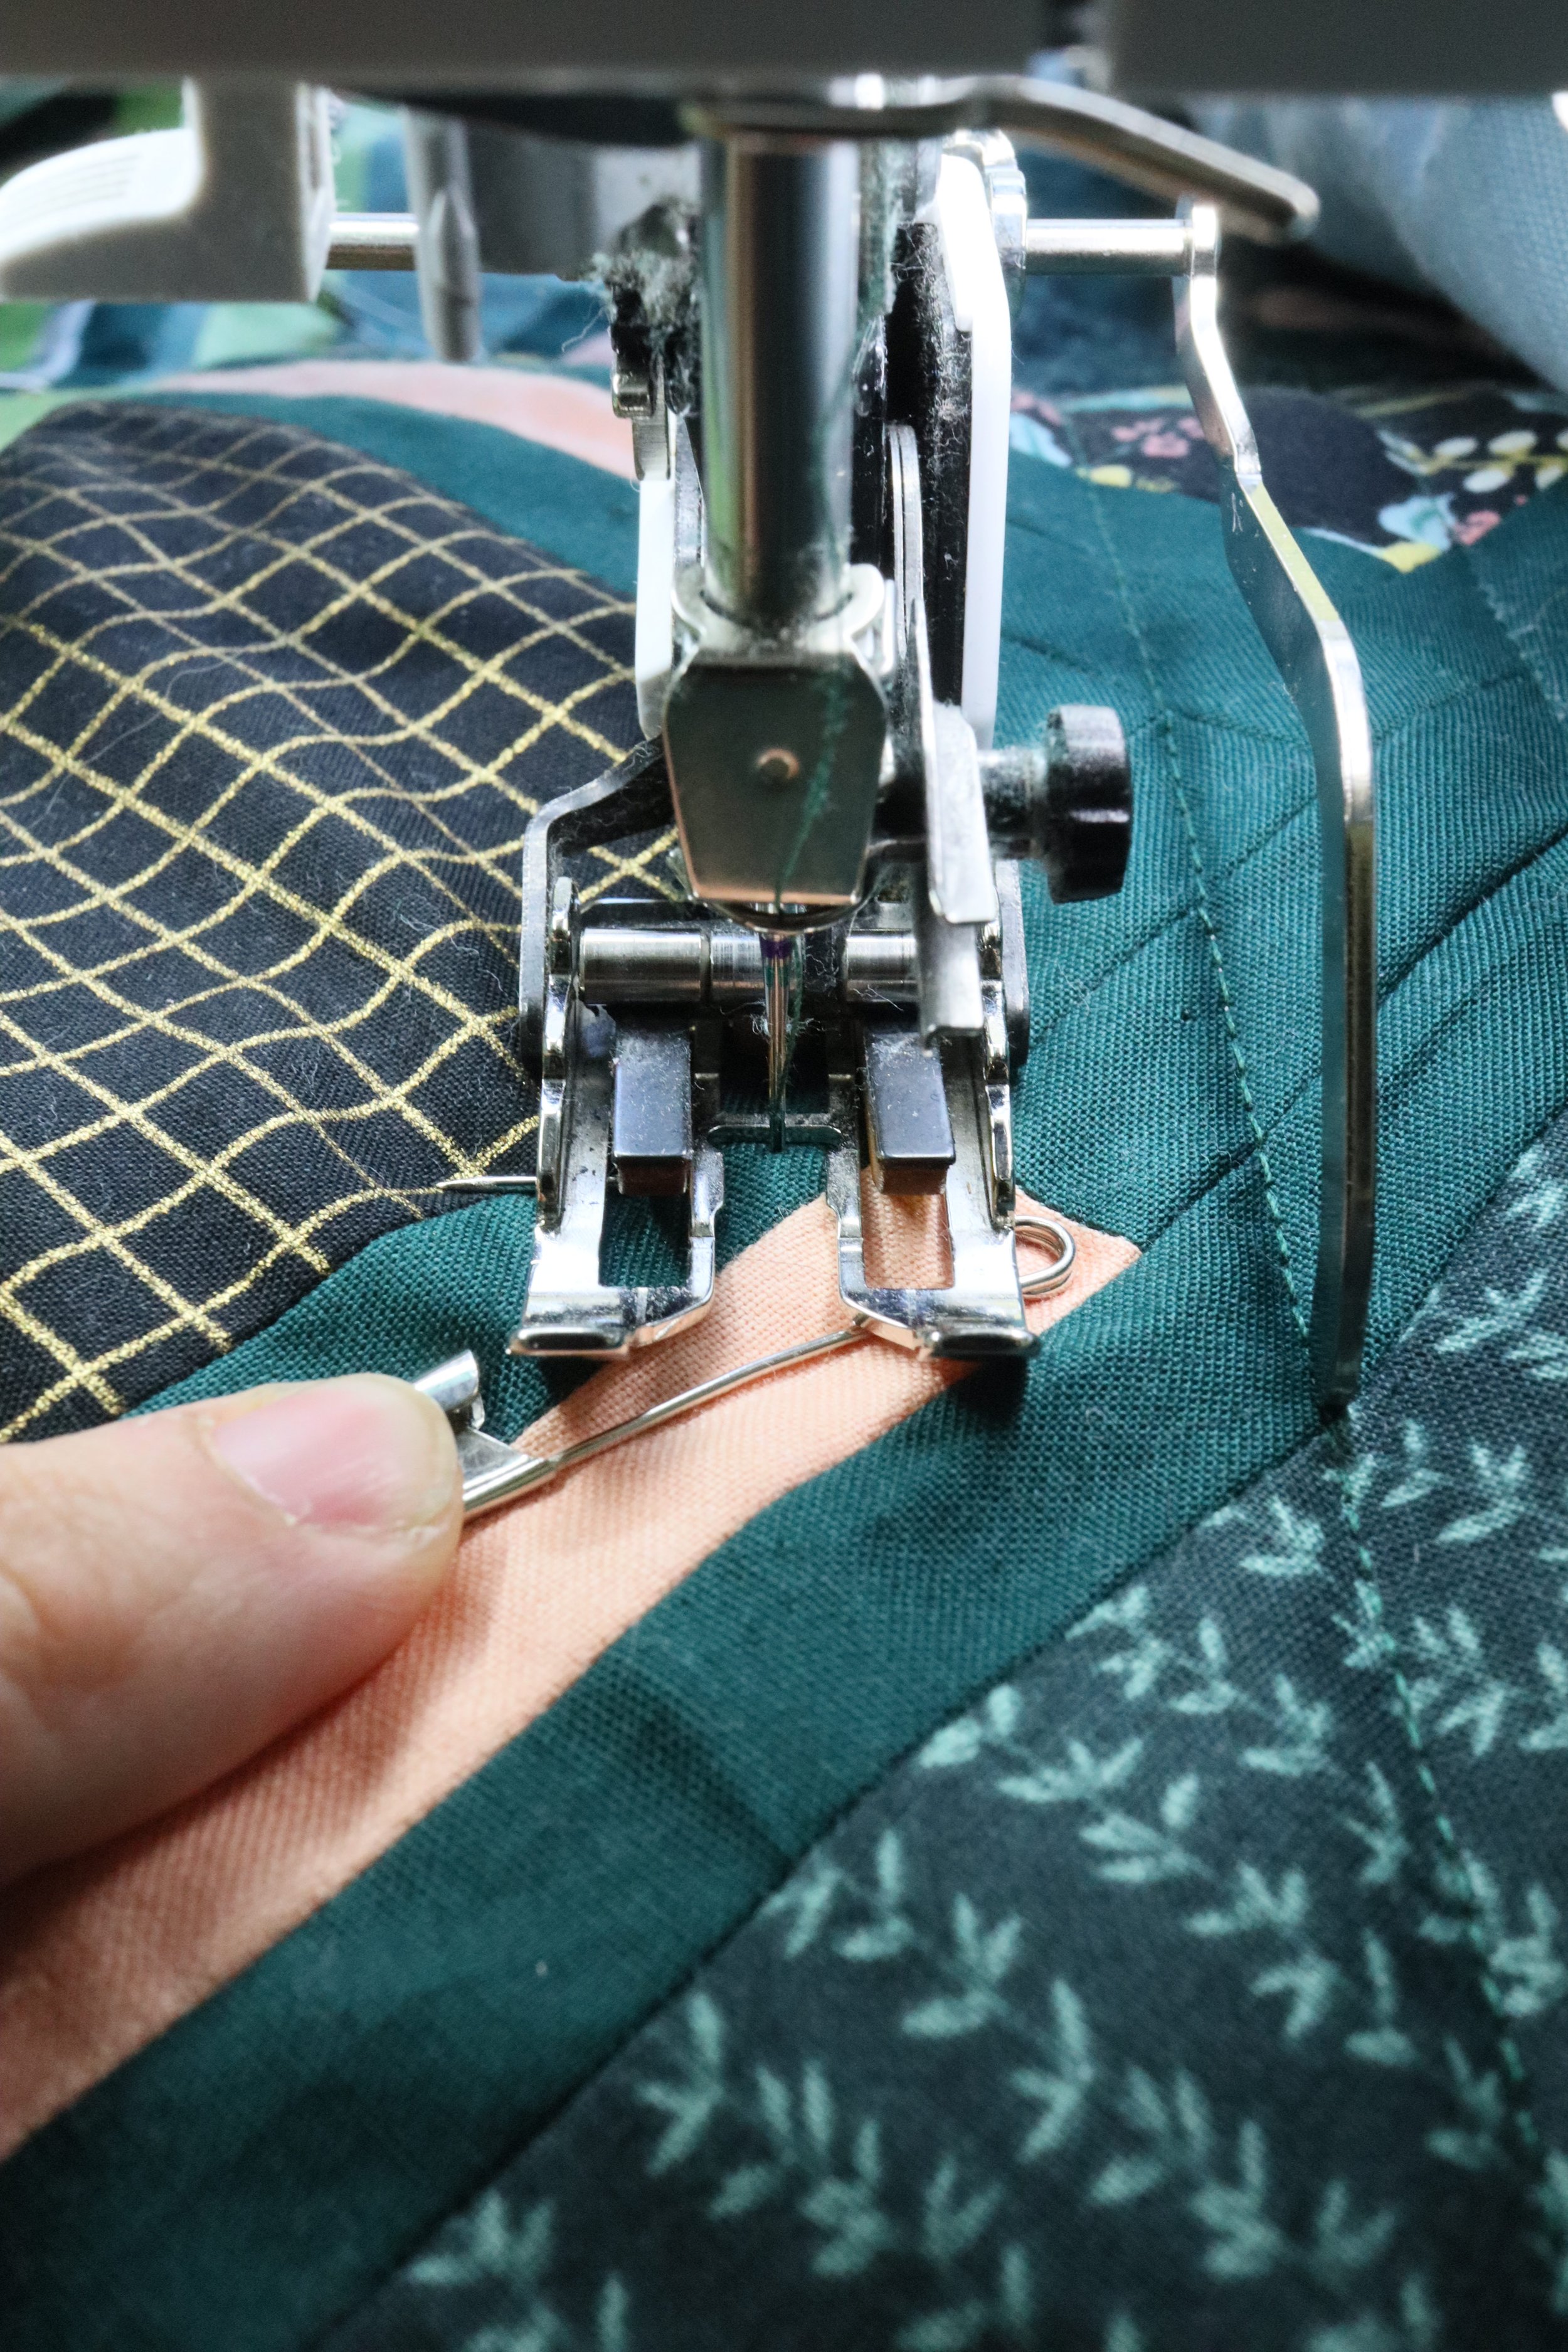 Hold the pin and pull it out just before the needle crosses it.